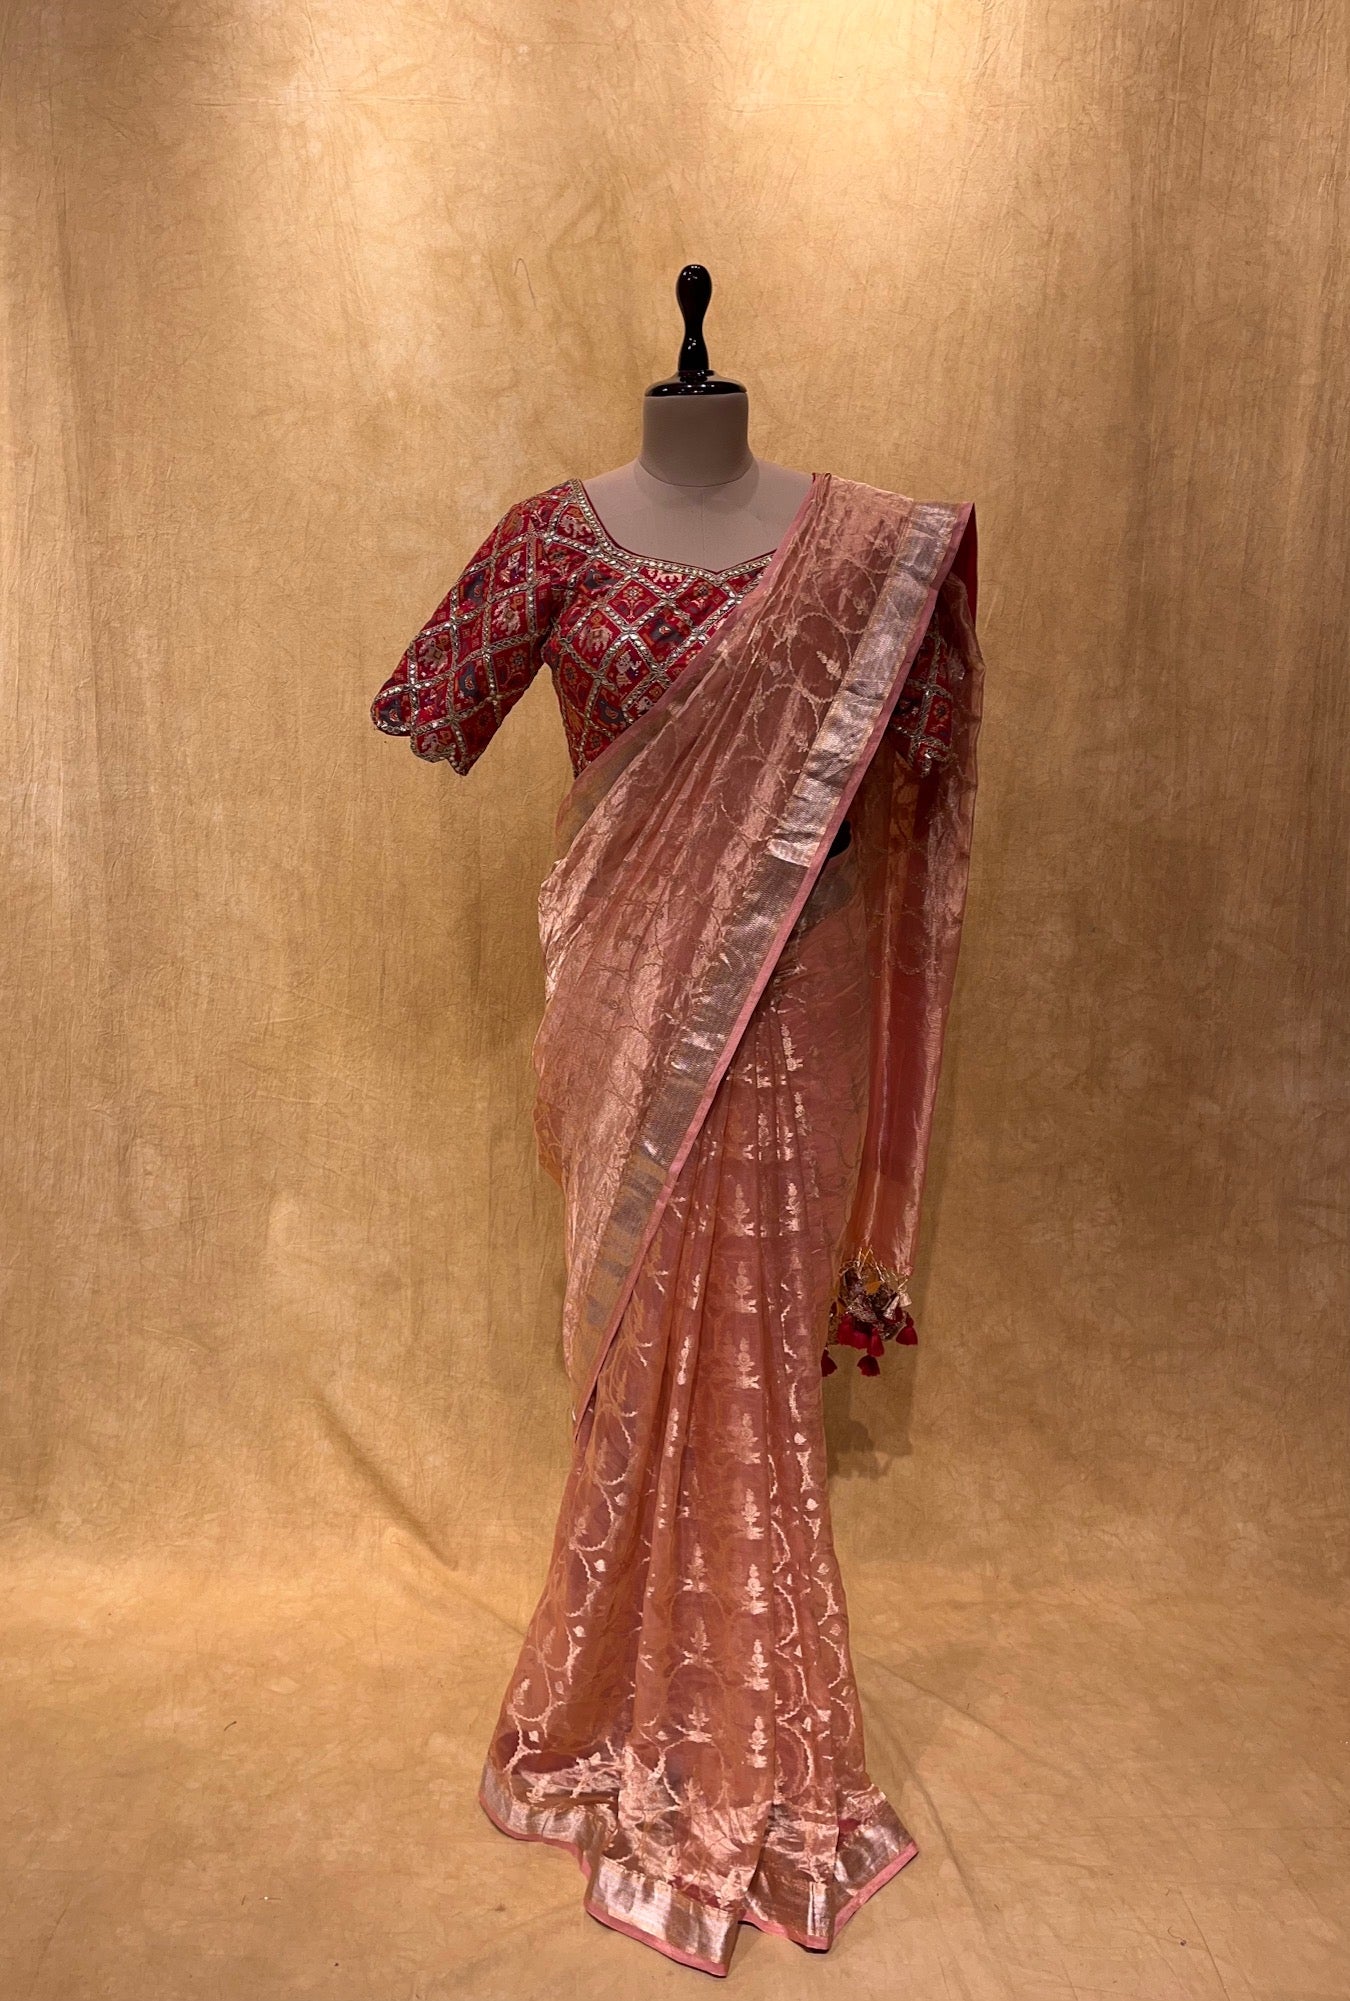 (DELIVERY IN 30 DAYS) PEACH COLOUR ORGANZA BANARASI SAREE WITH READYMADE PATOLA PRINT BLOUSE EMBELLISHED WITH GOTA PATTI WORK